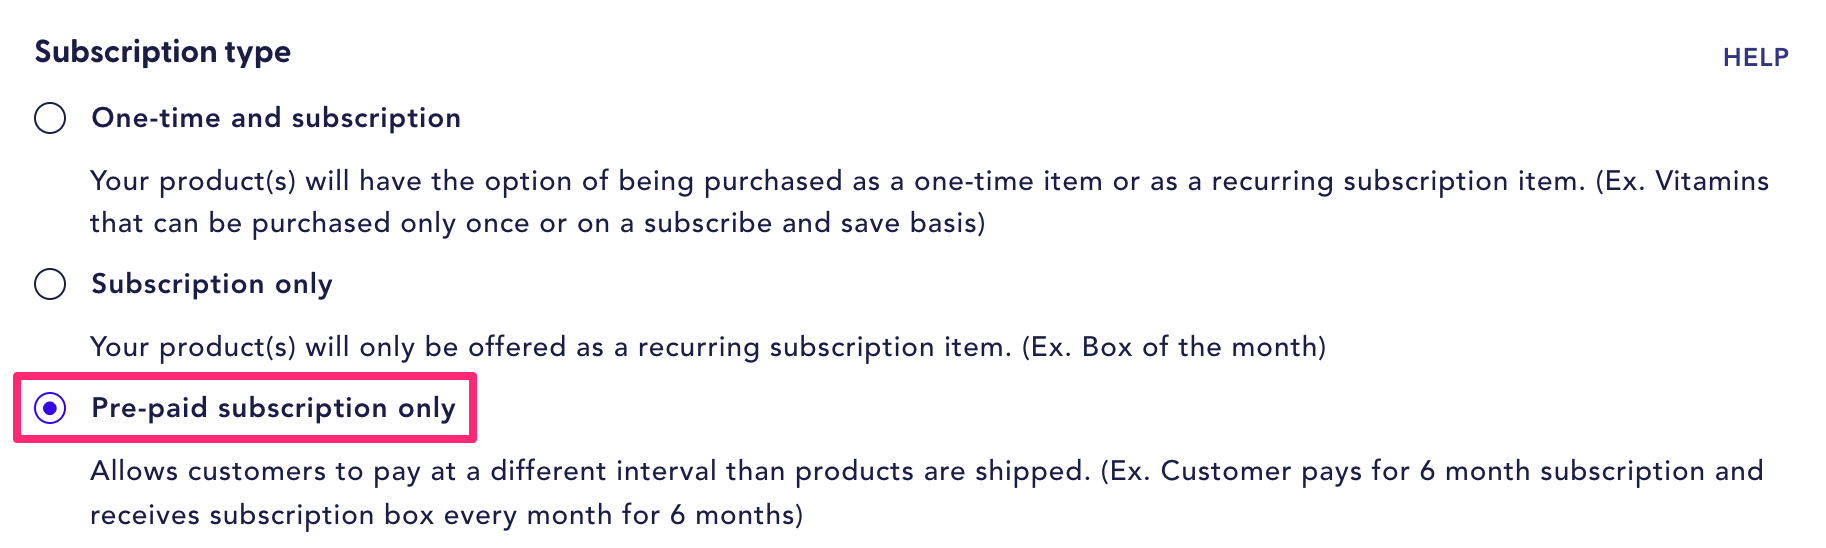 Create_a_pre-paid_subscription_product_in_Recharge.png